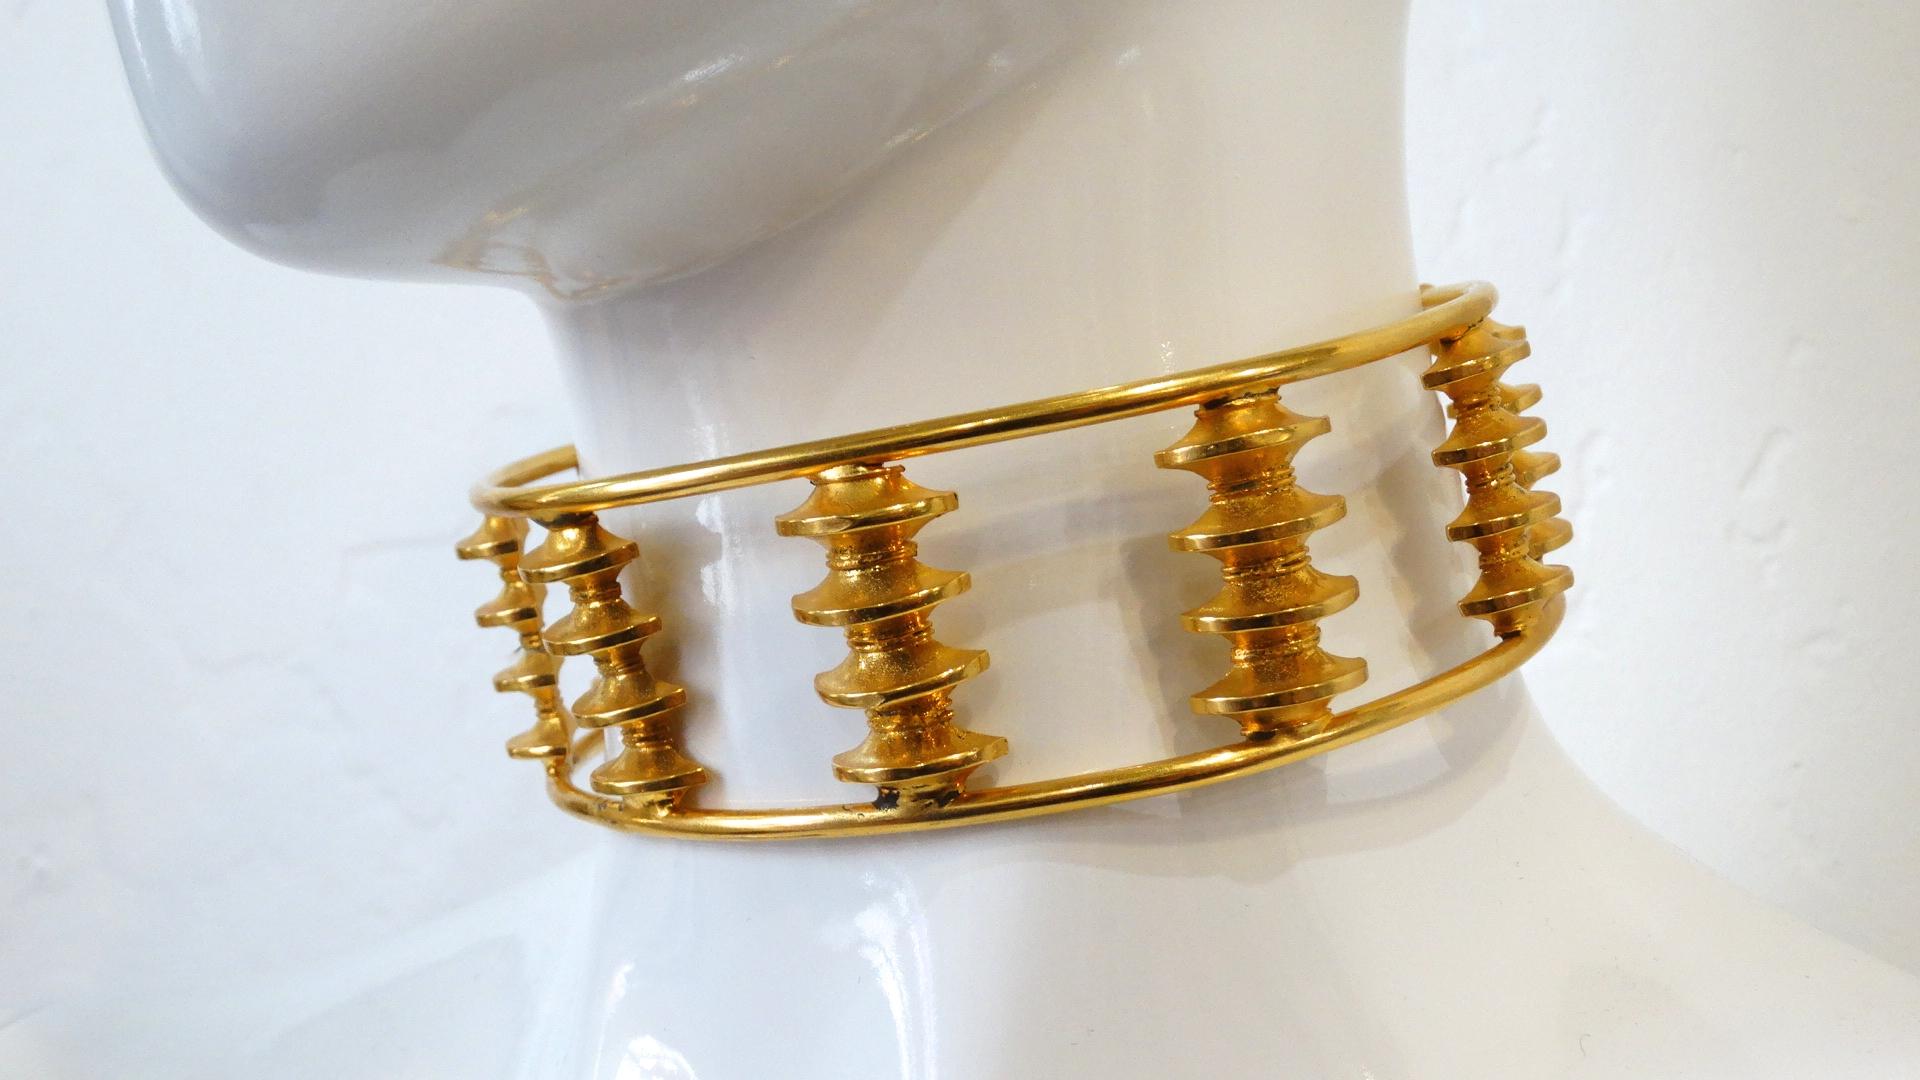 The Perfect Choker To Elevate Your Look Is Here! Circa 1970s, this William de Lillo statement choker is a U shape for easy wear and is plated gold. Features tiered columns around choker which resemble the curved roofs found in Japanese Buddhist